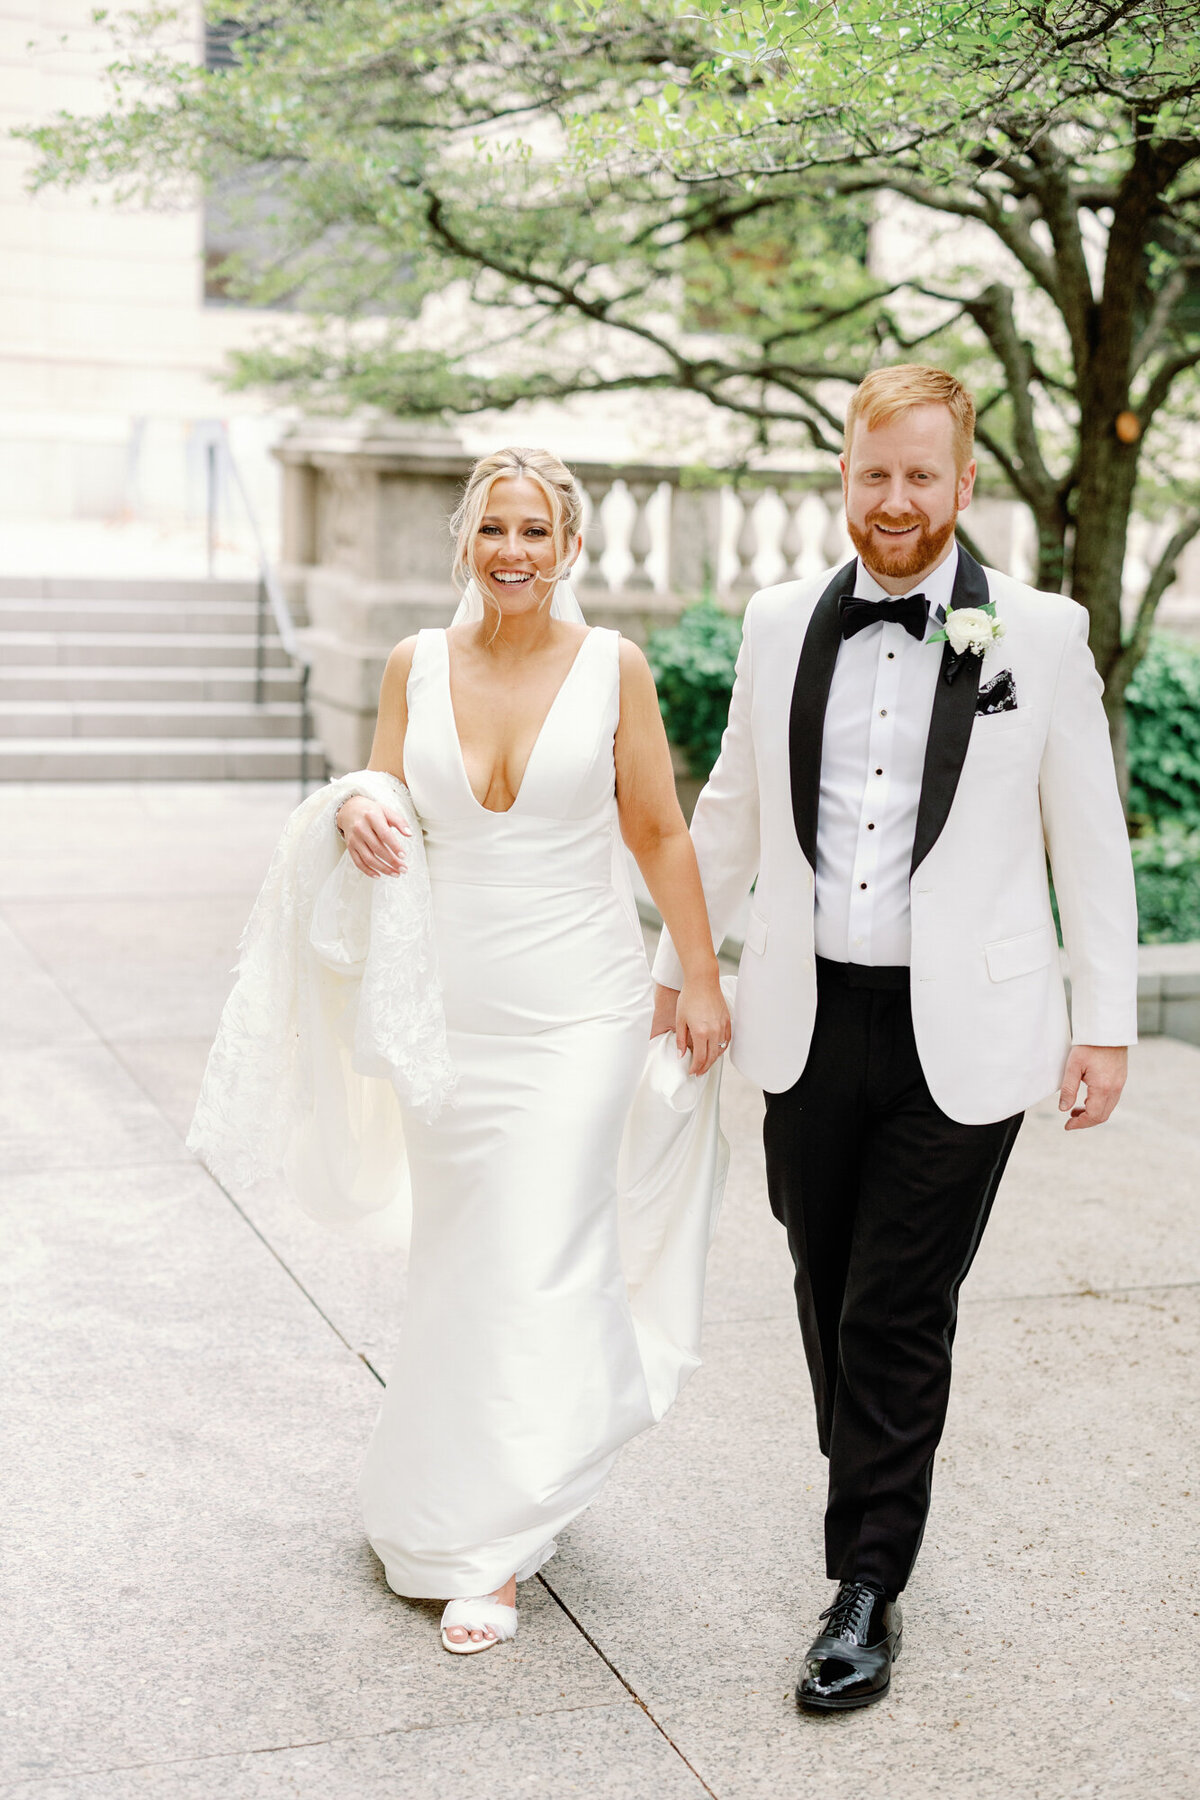 A photo of newlyweds as they walk through the South Garden at the Art Institute of Chicago